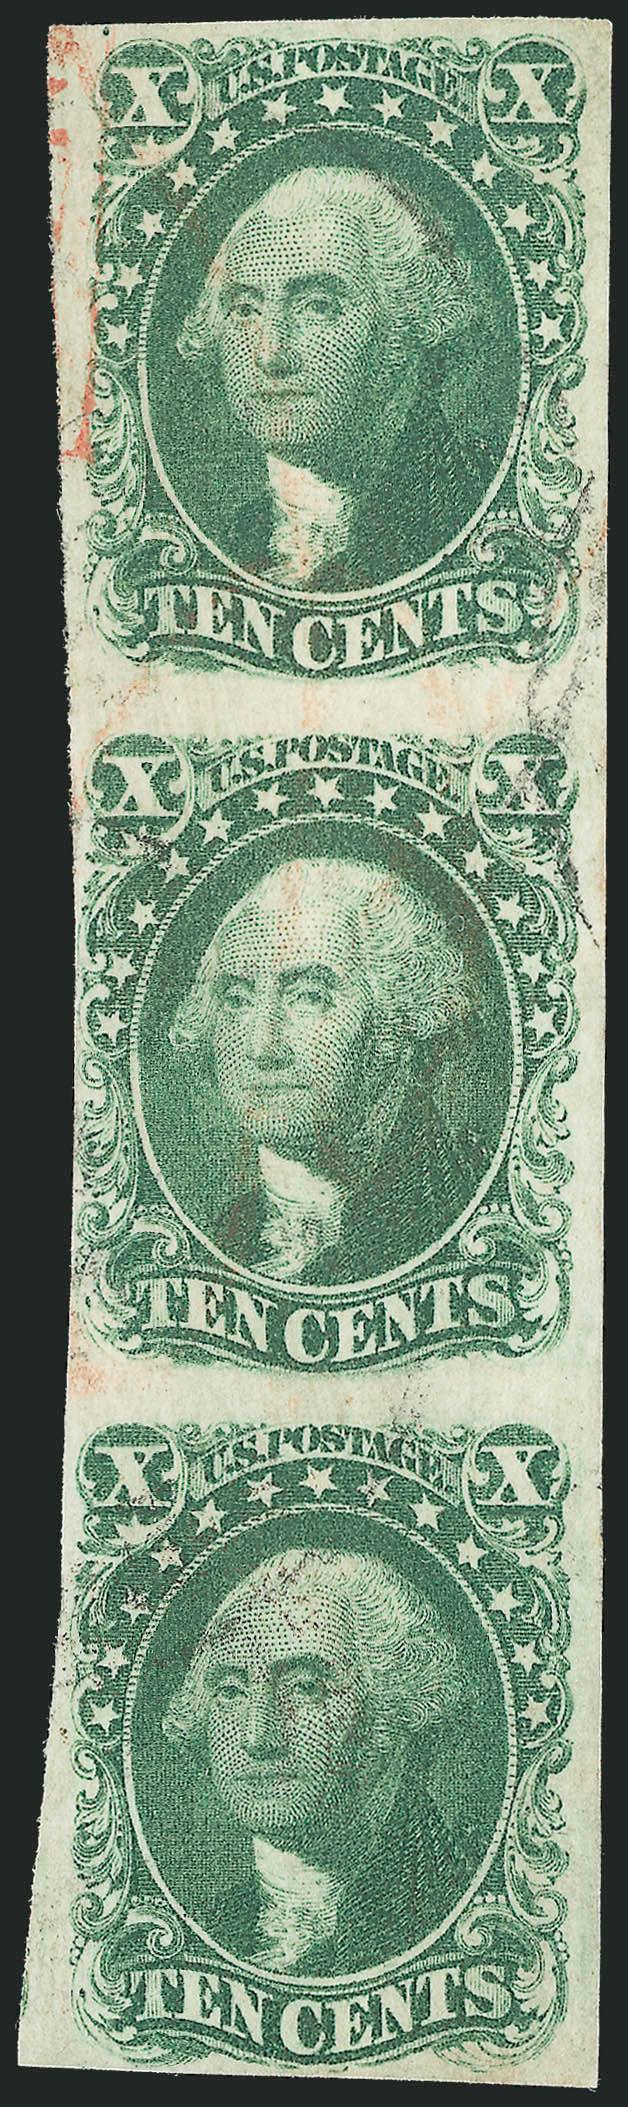 10c Green, Ty. IIIIII (141513).> Positions 758595R1, vertical three-type combination strip of three with Type I at bottom, large margins to clear, deep rich color, light cancels<><>^VERY FINE. A RARE STRIP OF
THREE OF THE 10-CENT 1855 IMPERFO